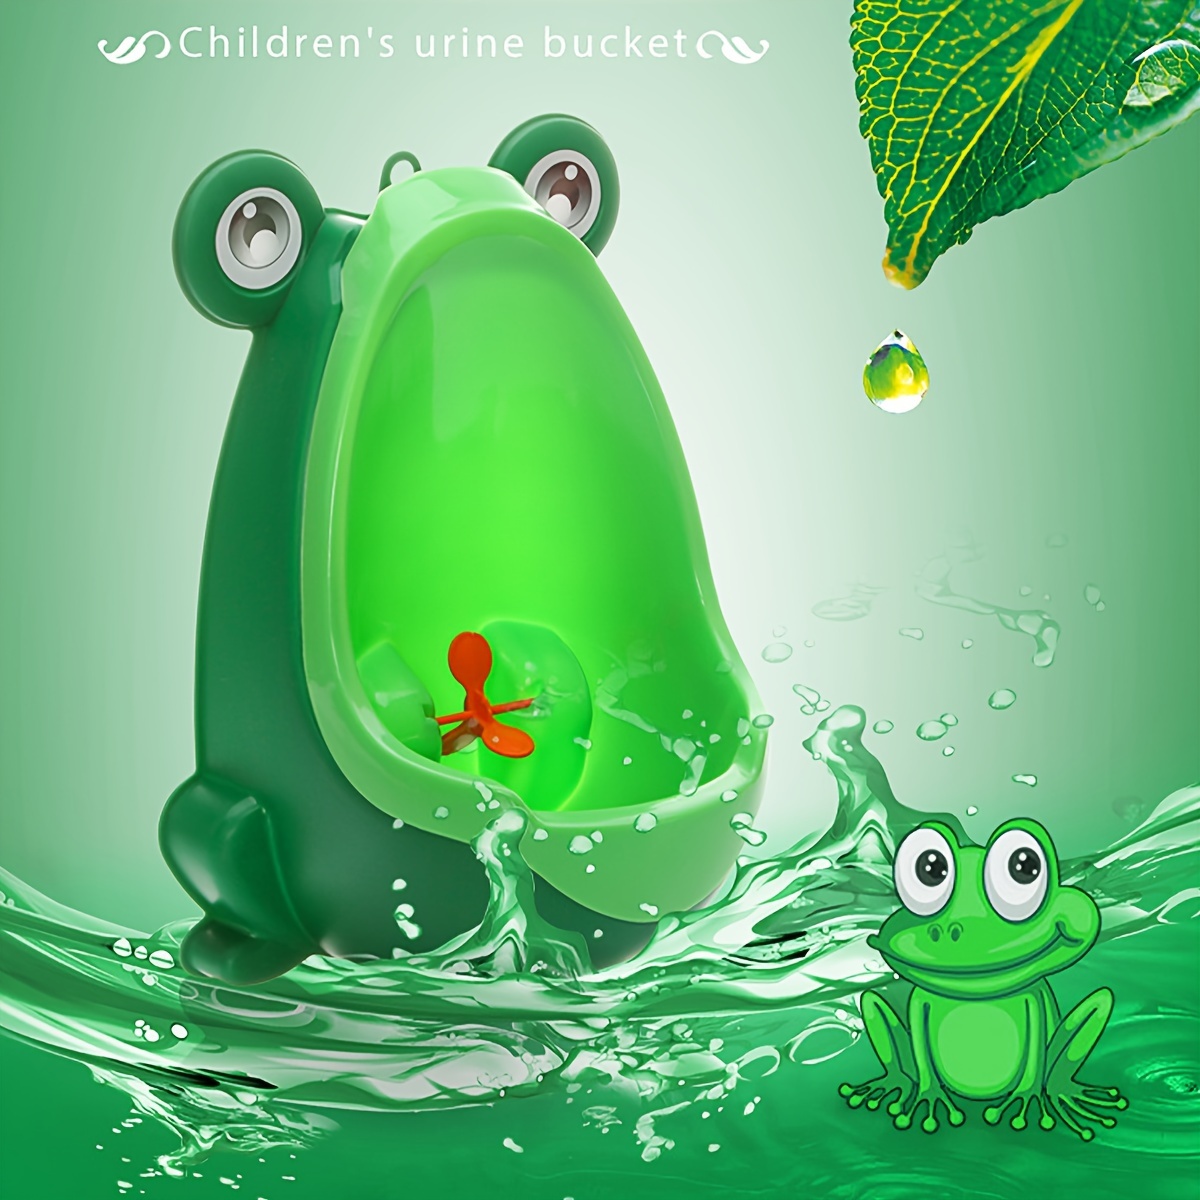 

1pc Frog-shaped Potty Training Urinal, Wall-mounted, Polypropylene Material, Kid-friendly Design, With Whirling Target, Easy-clean, Green, 7.08x6.29x10.62 Inches